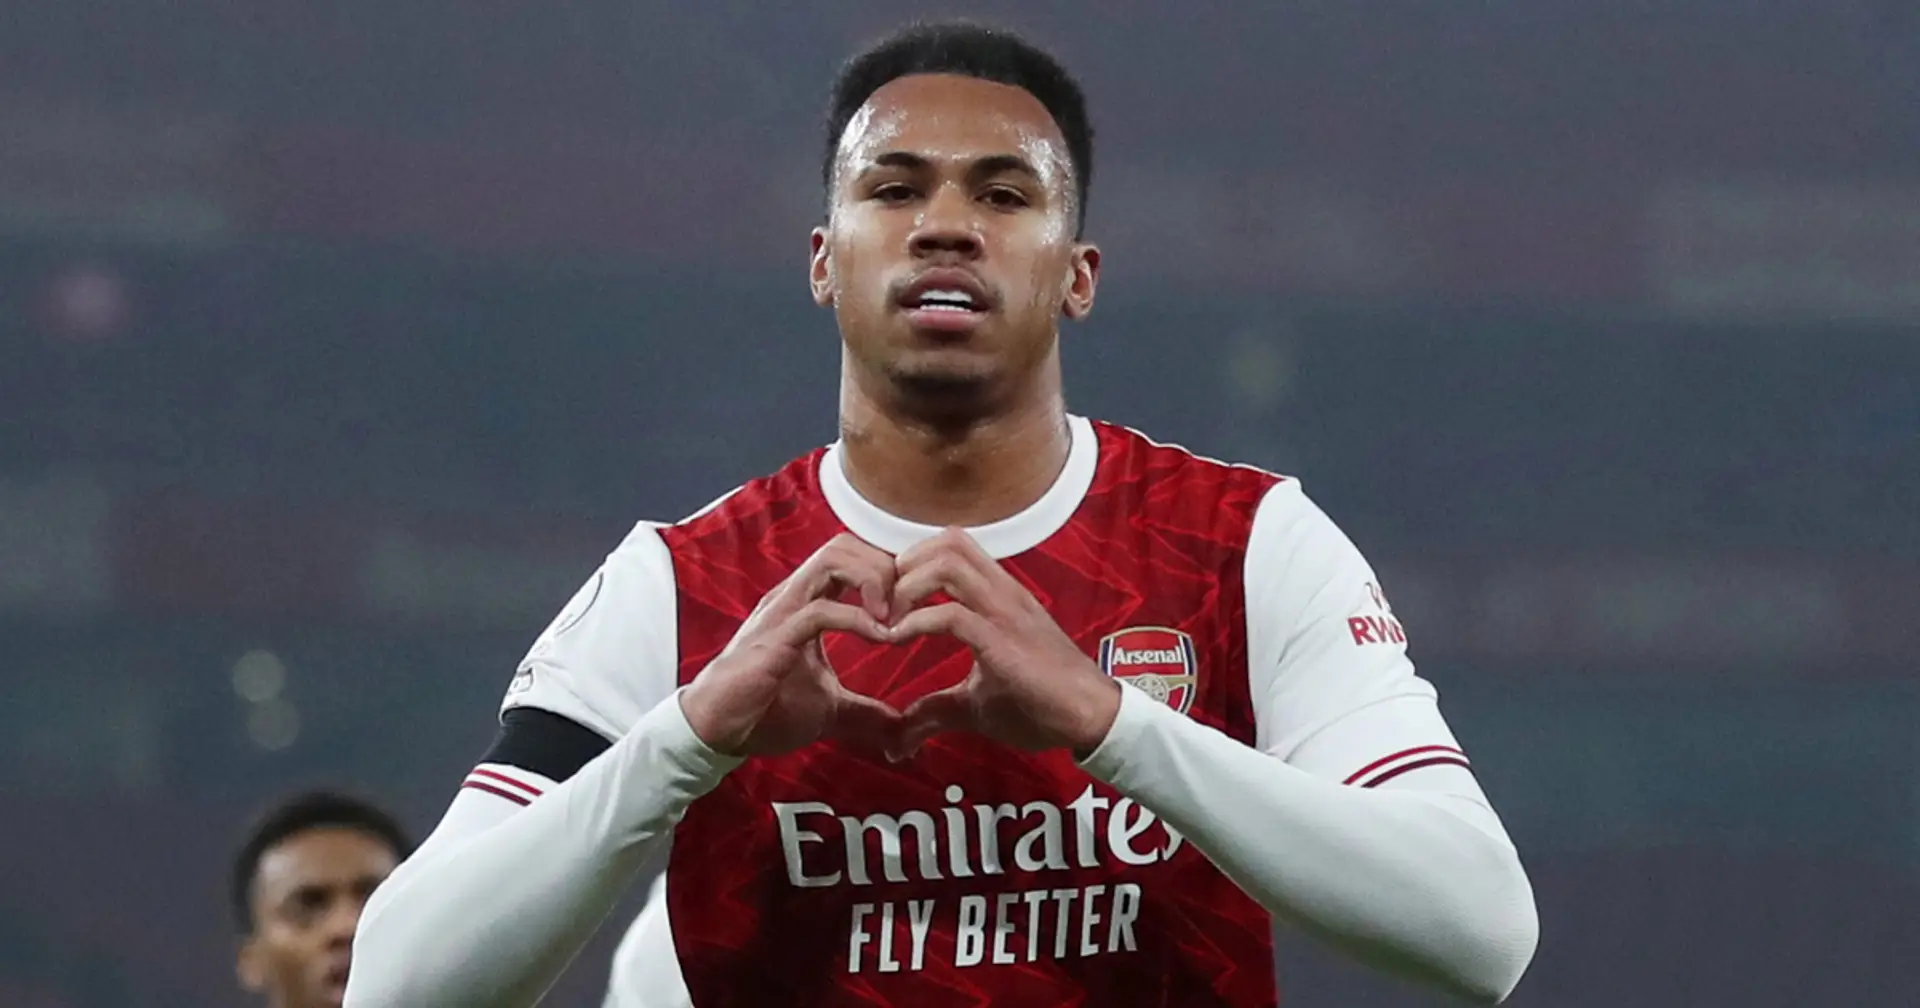 'He is a shining light': Ian Wright picks Gabriel as Arsenal's best player vs Wolves